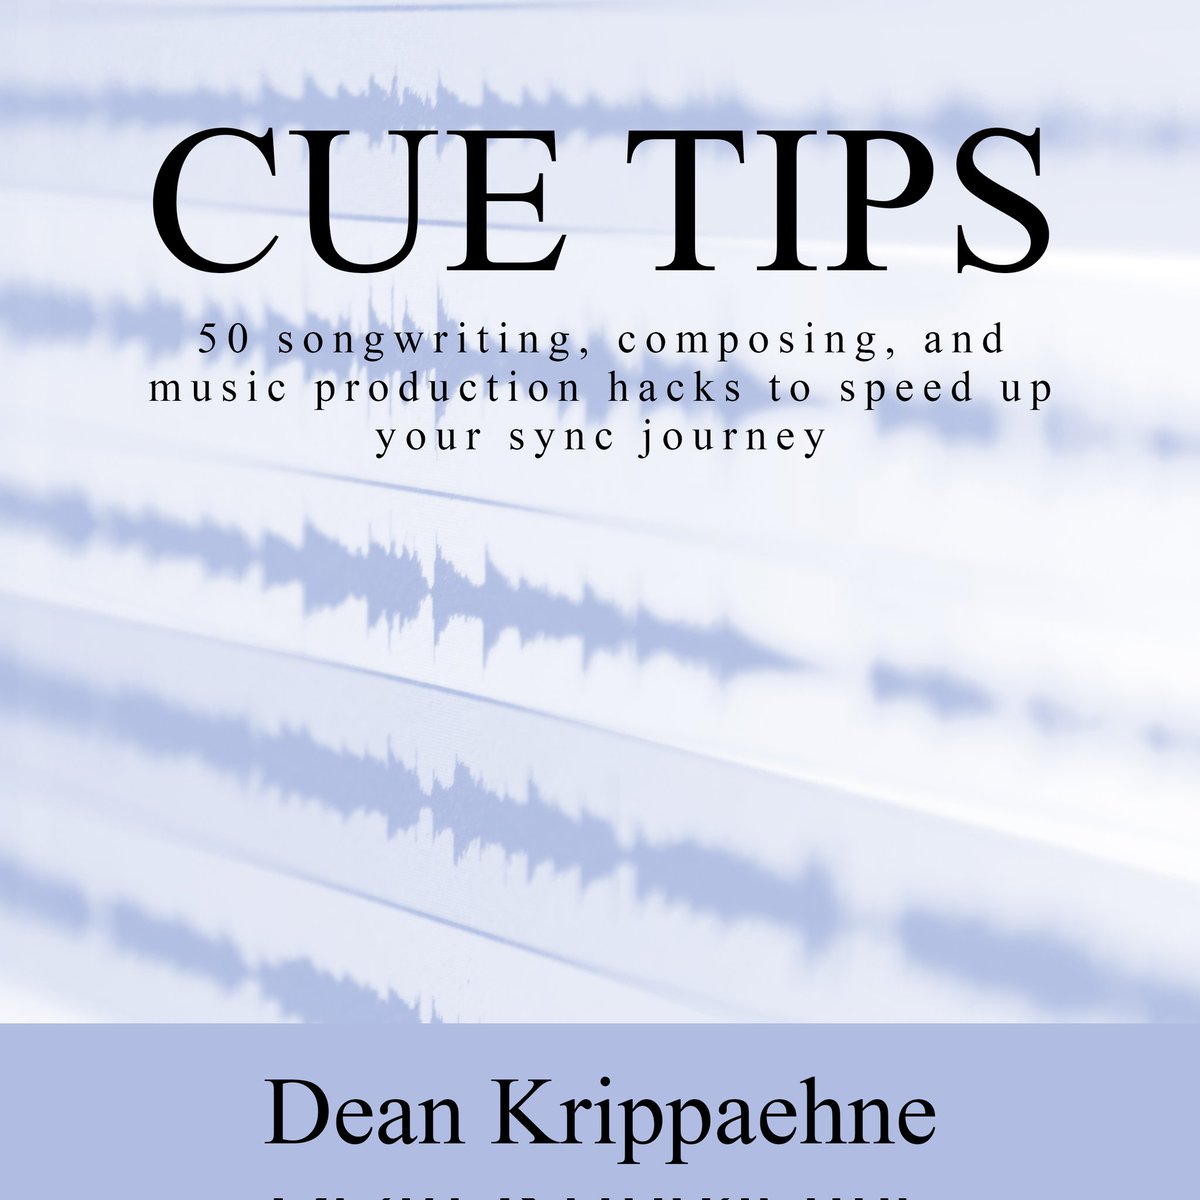 NEW BOOK OUT!!! Yup, I wrote a brand spankin' new book packed full of tips, tricks and hacks for creating effective Production Music 'Cues' for sync in the Film, TV, Ads, etc... world. Available in paperback or ebook on Amazon.  #songwriter #composer #productionmusic